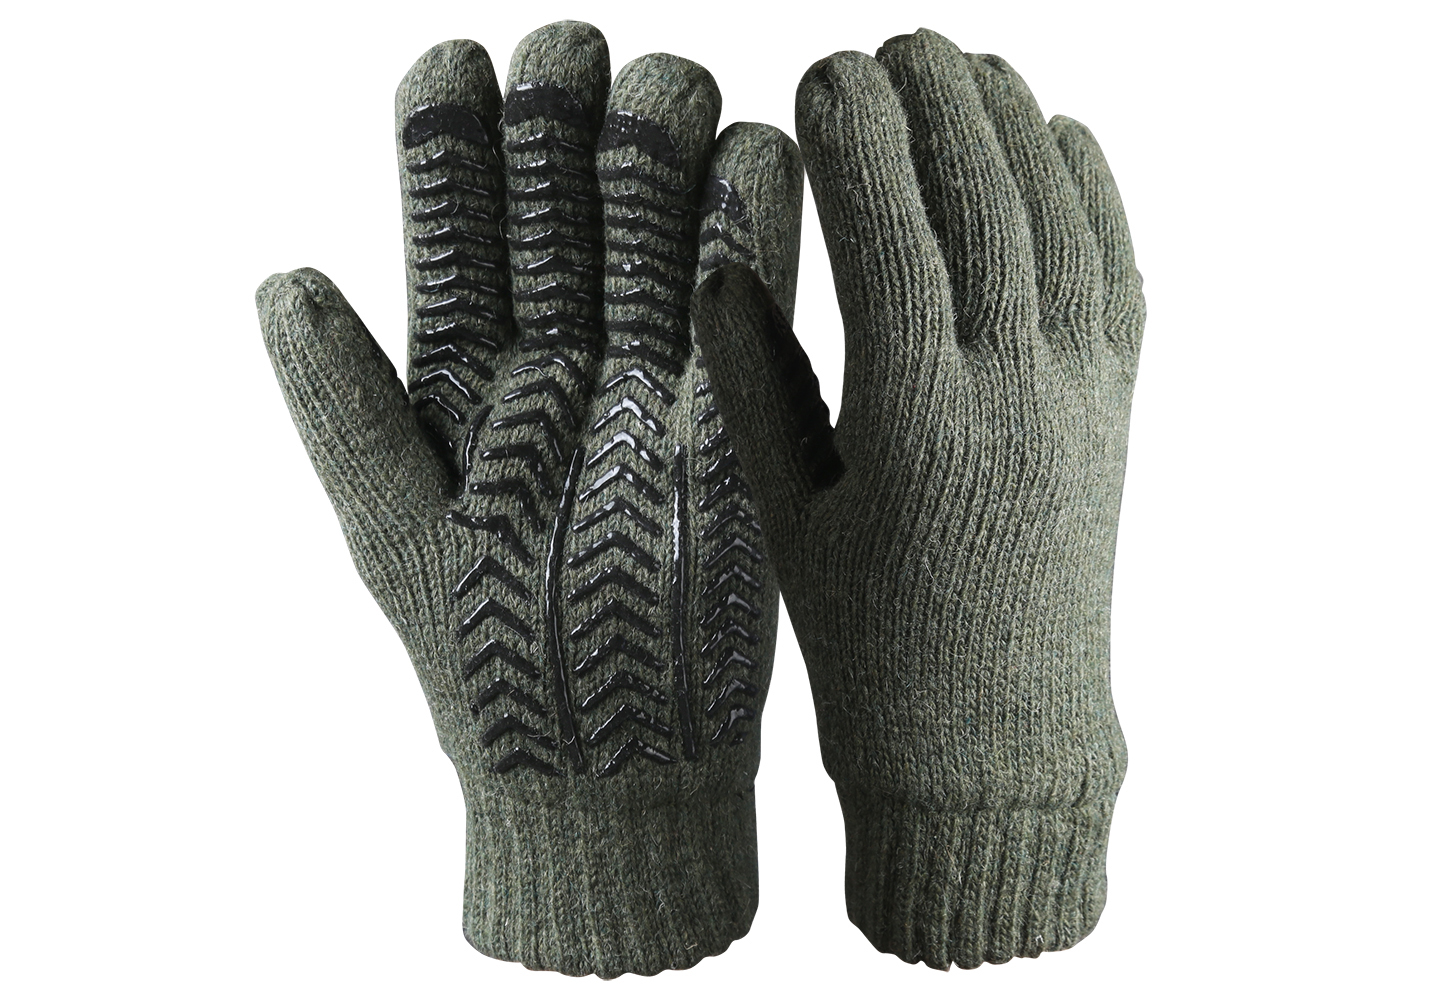 ragg wool and leather gloves